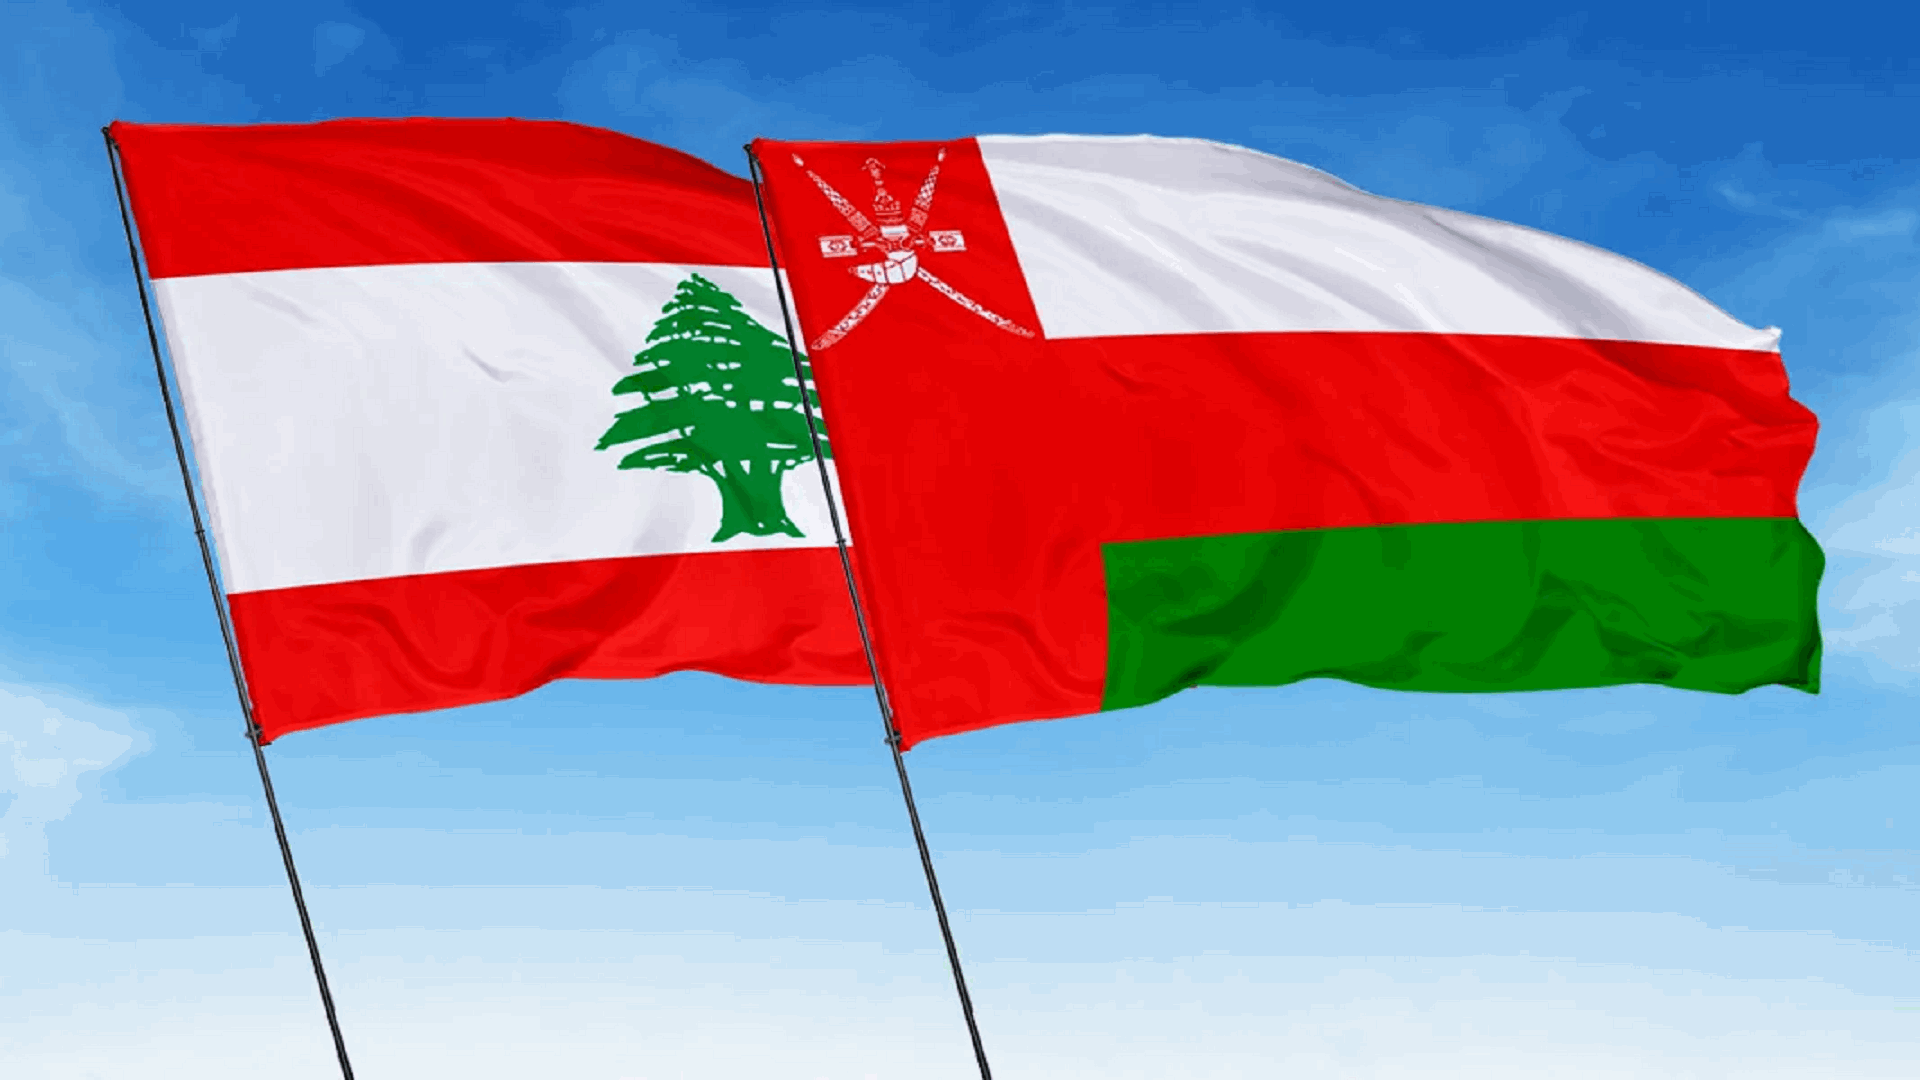 Lebanon condemns recent shooting incident in Oman, affirms stance against extremism